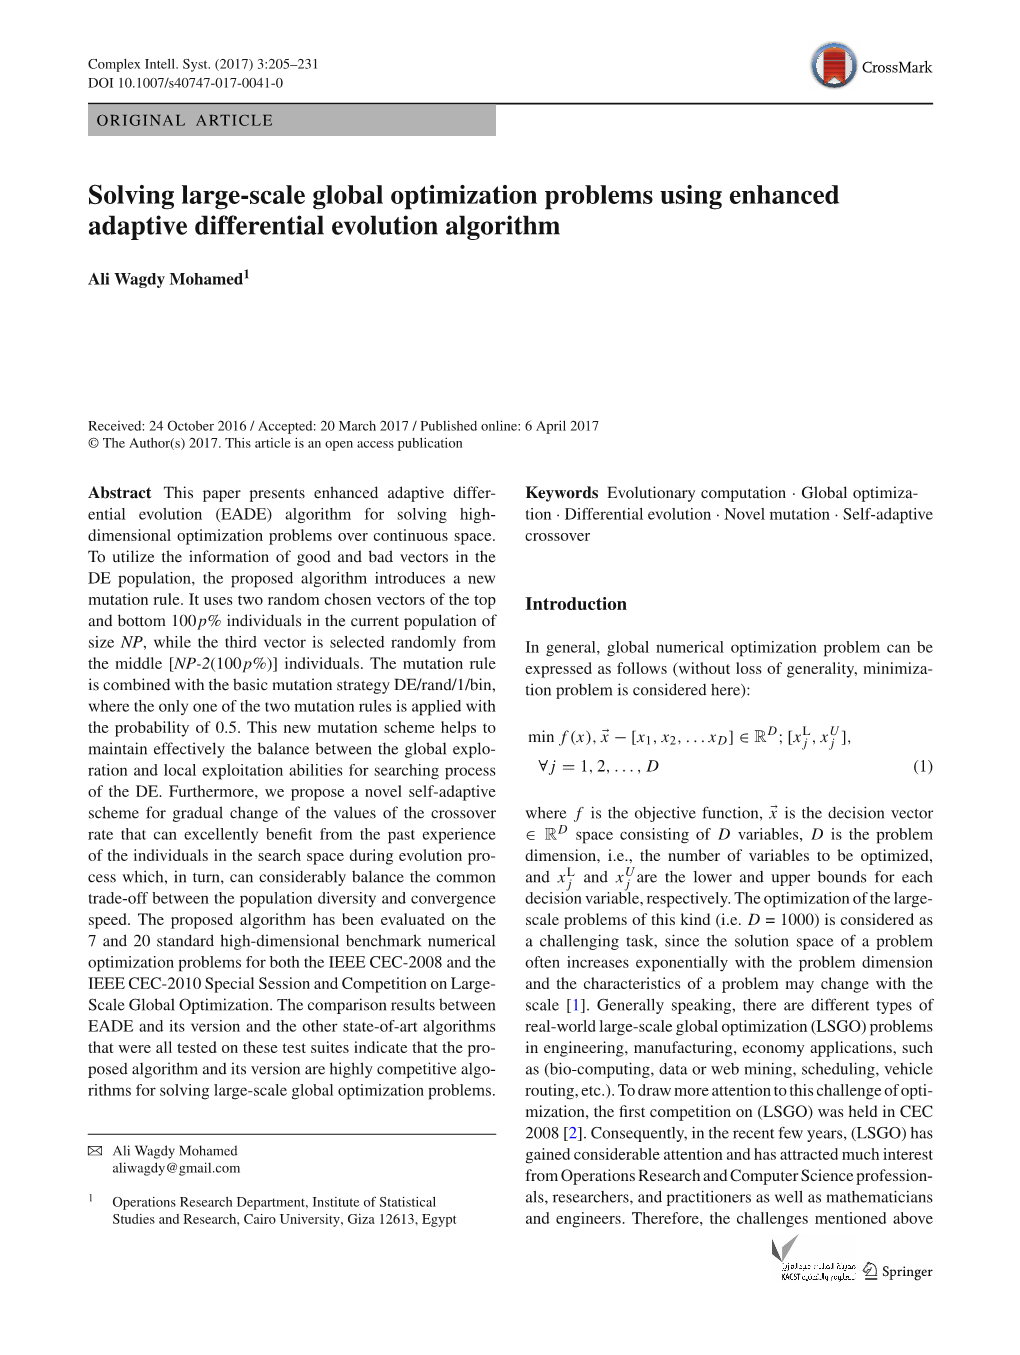 Solving Large-Scale Global Optimization Problems Using Enhanced Adaptive Differential Evolution Algorithm